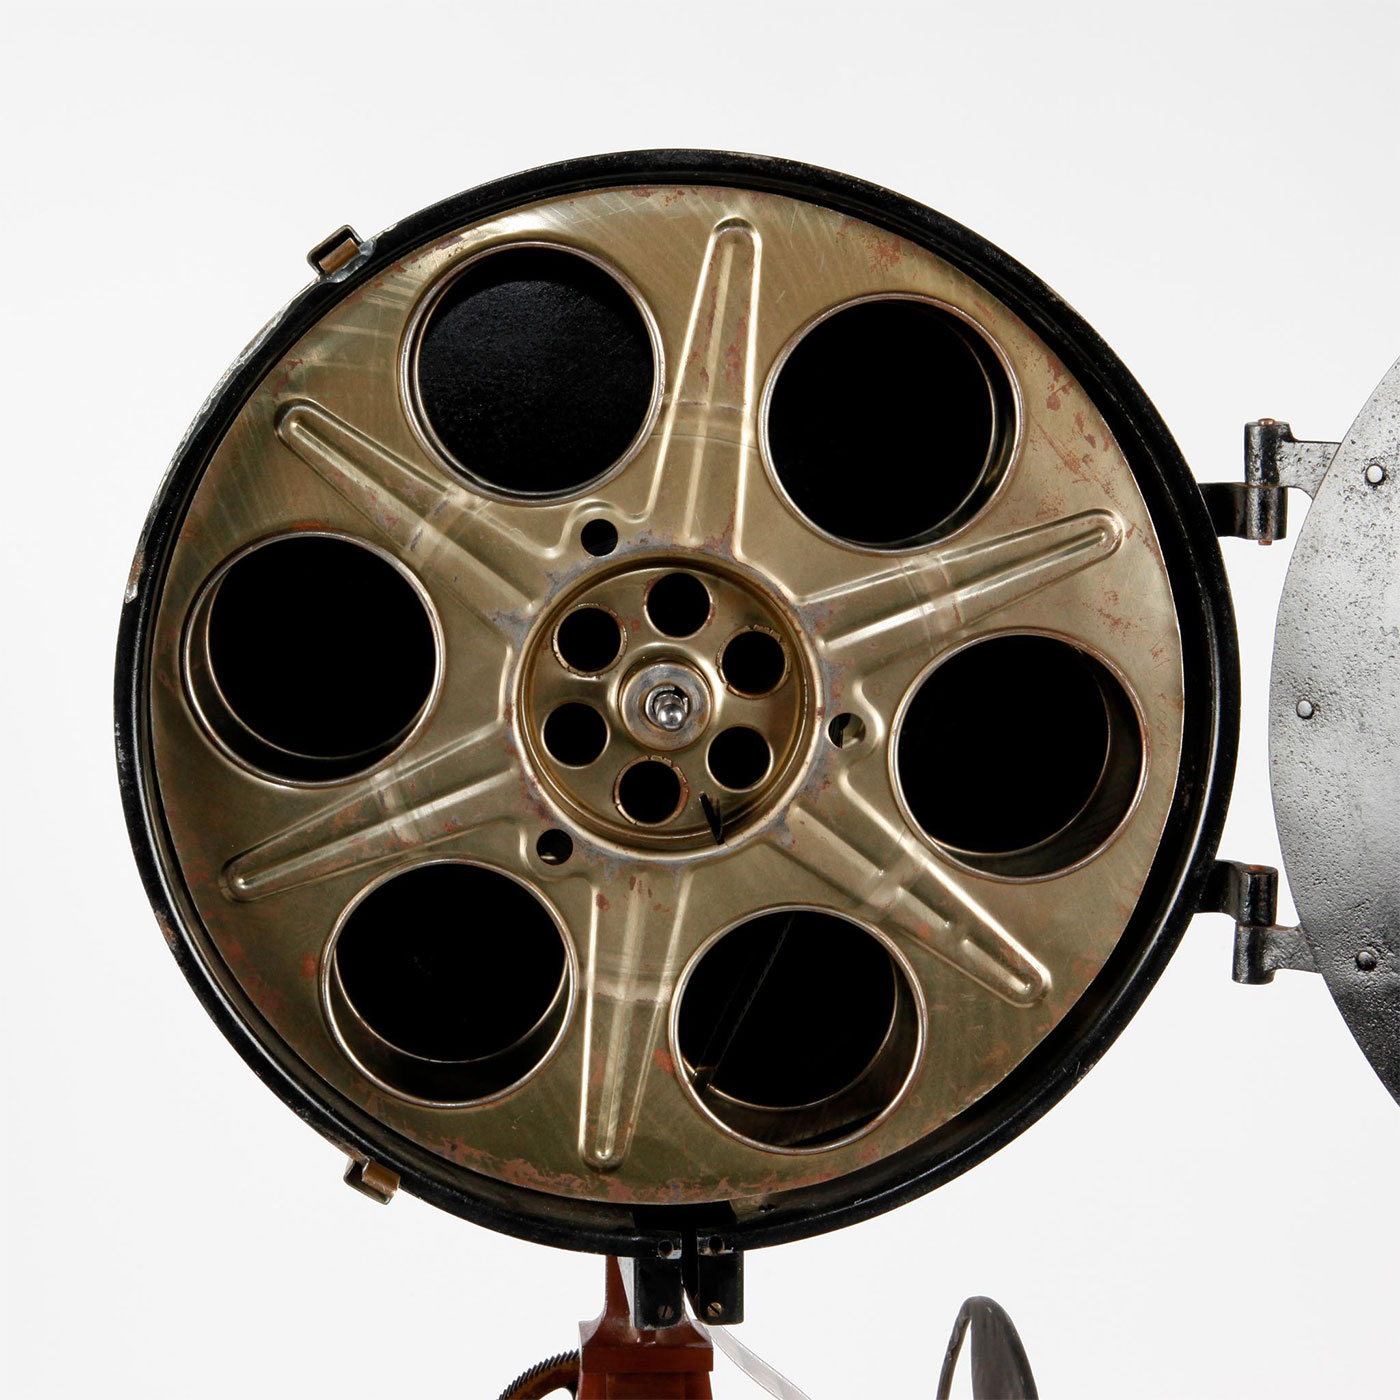 IMPORTANT PATHE 35MM MOVIE PROJECTOR - Image 3 of 12